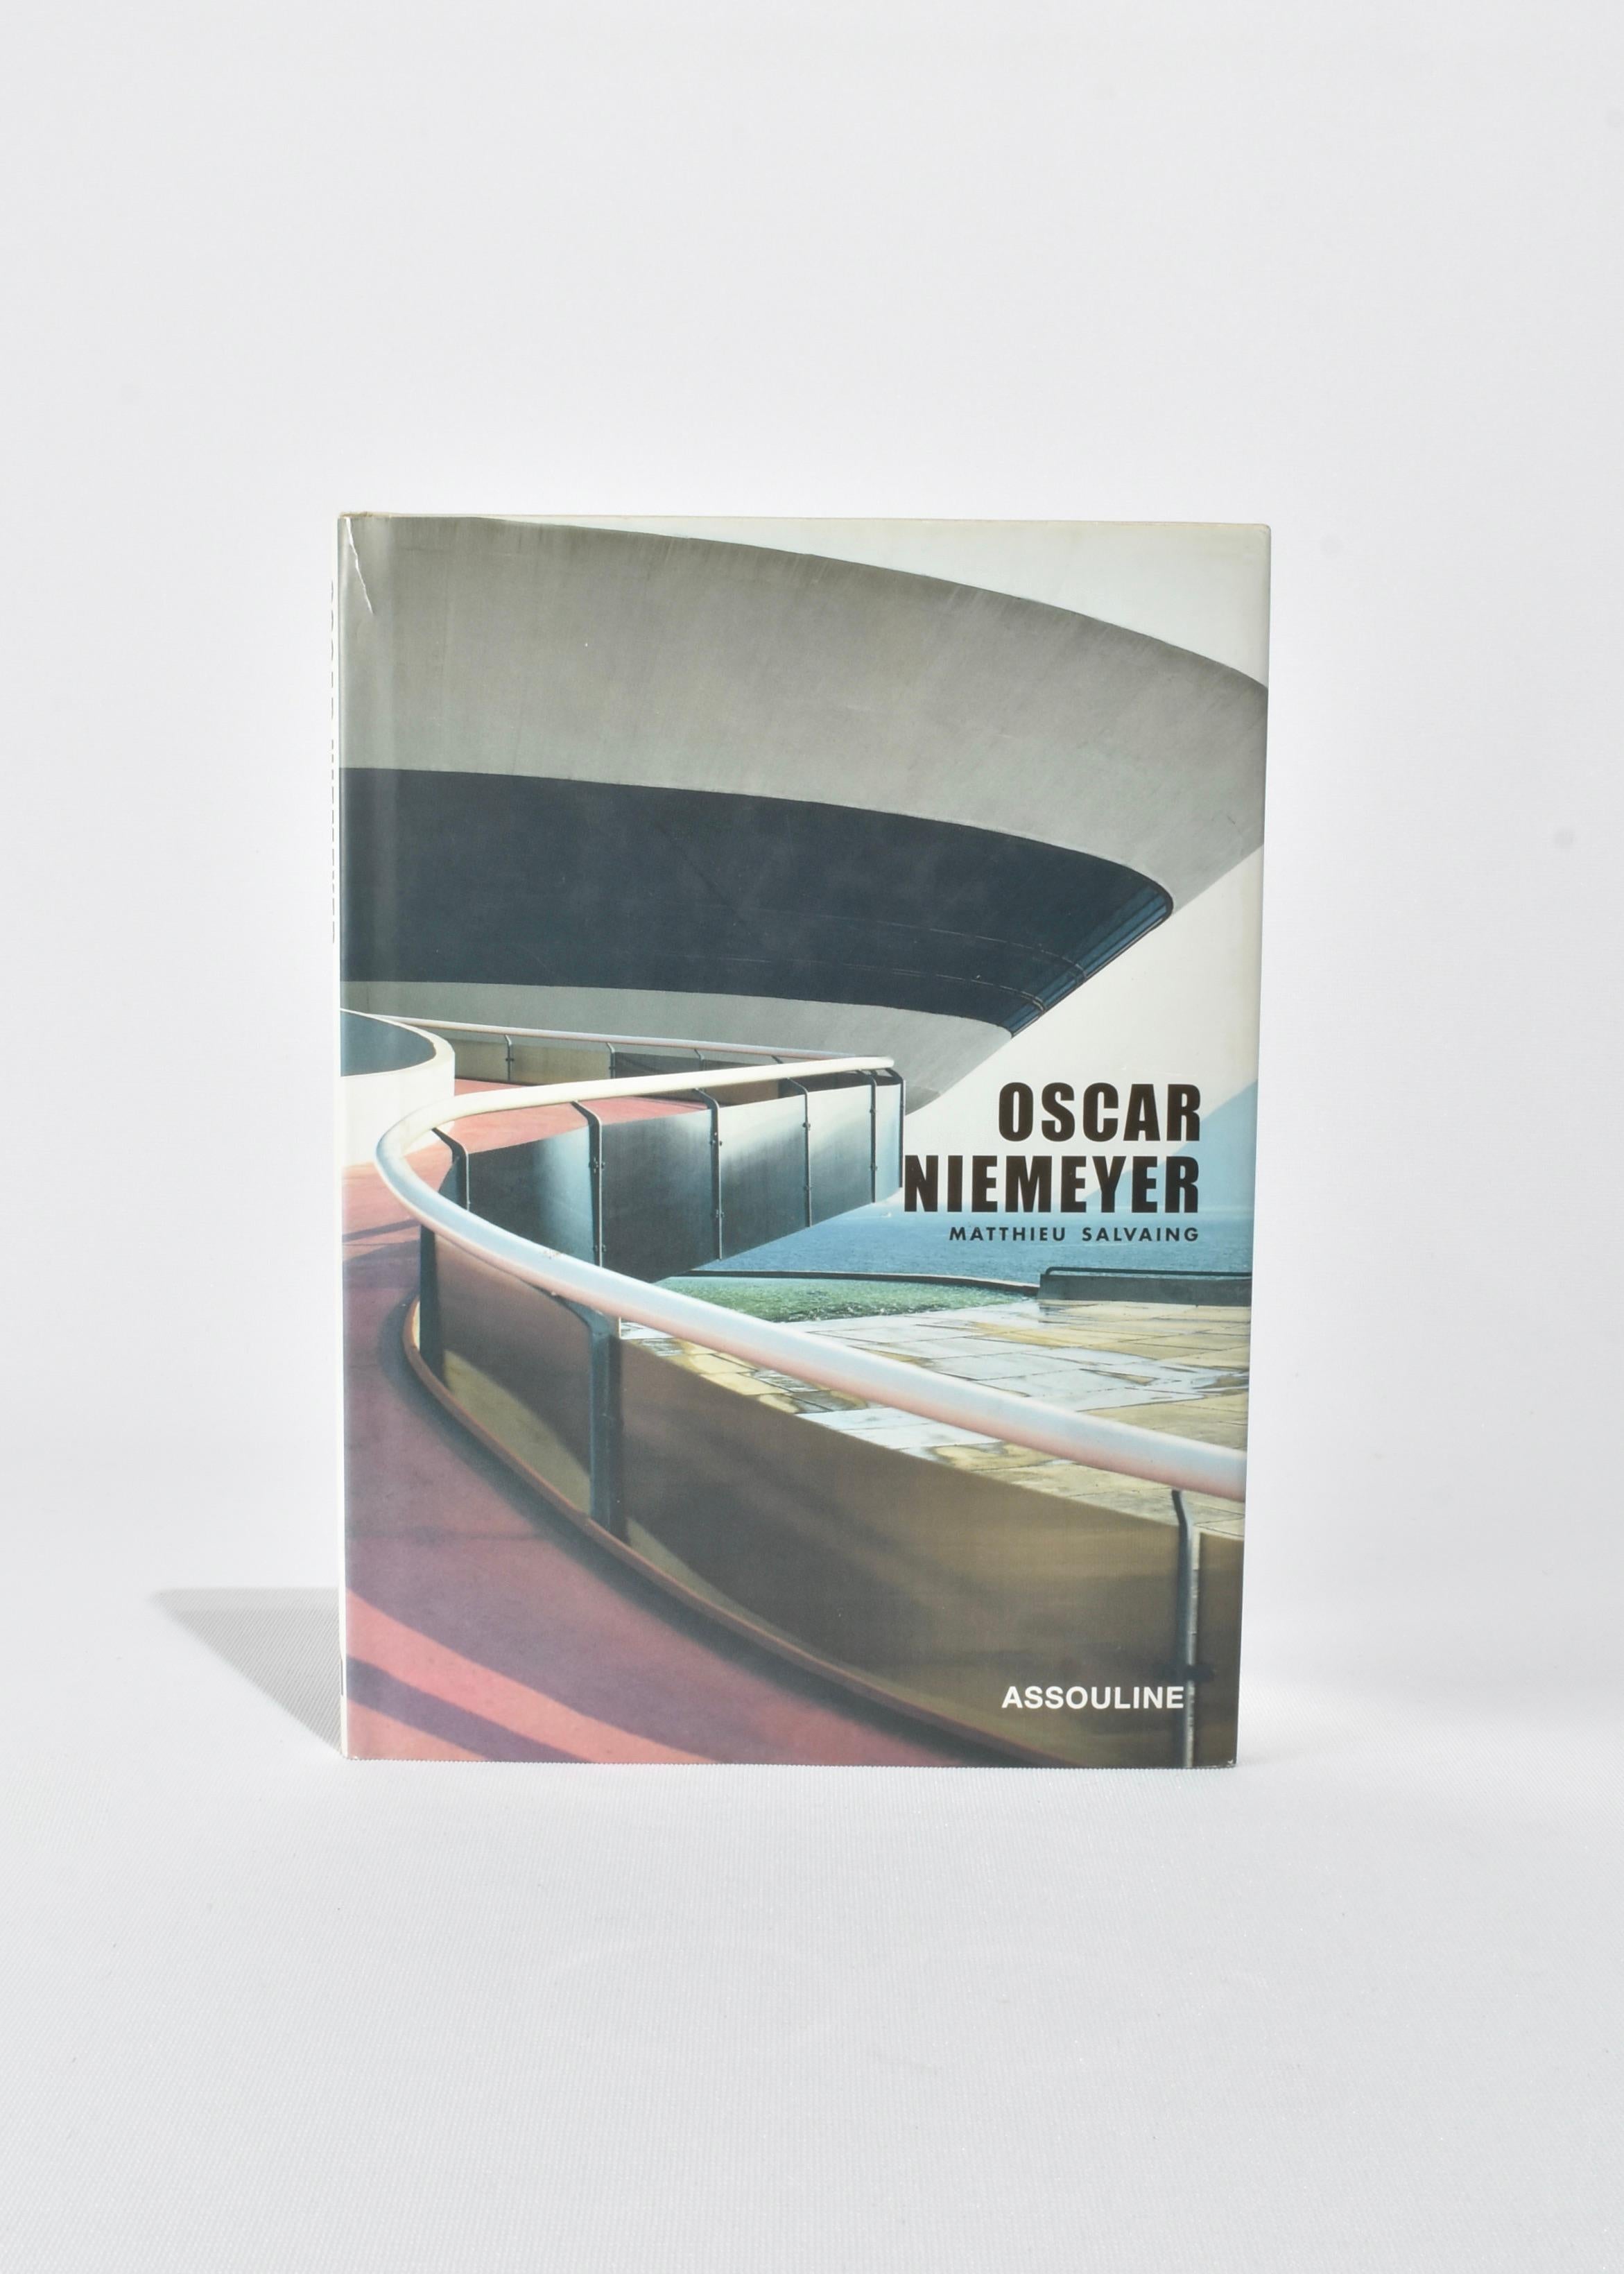 Hardback coffee table book featuring the work of architect Oscar Niemeyer. By Matthieu Salvaing, published in 2002. First edition, 79 pages.

